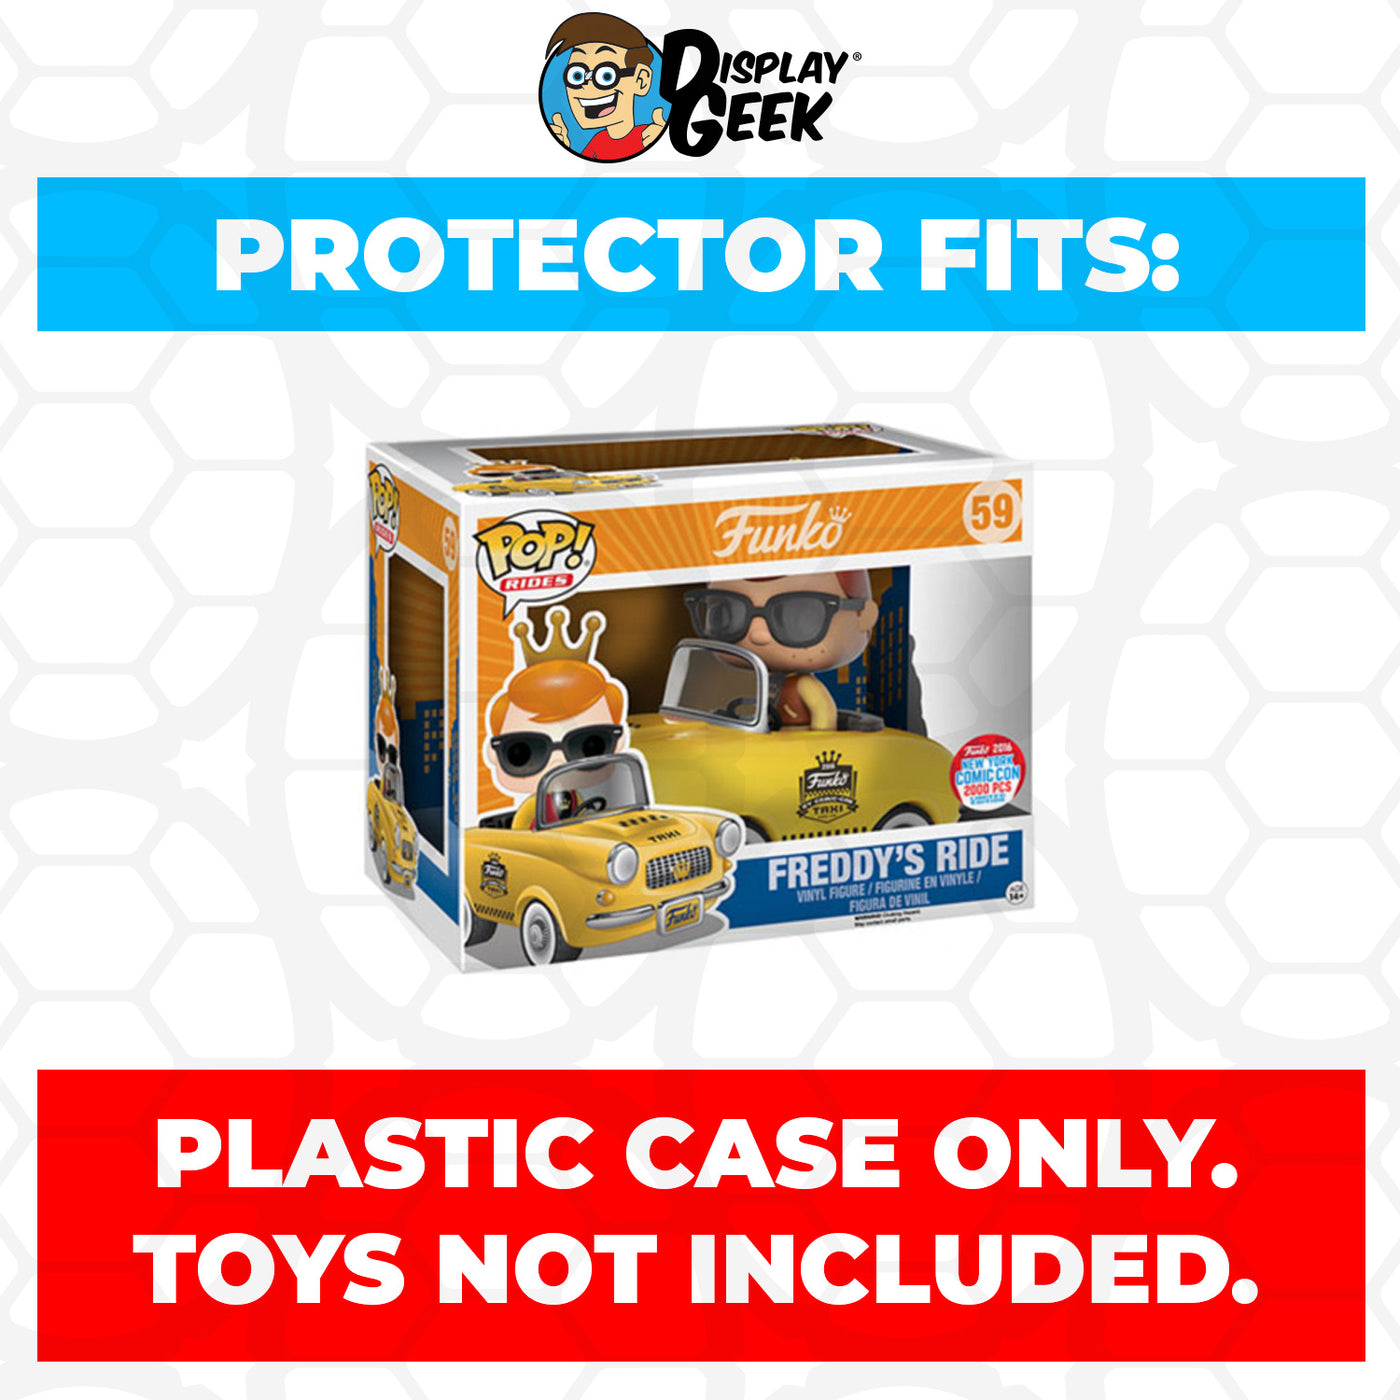 Pop Protector for Freddy's Ride Yellow Taxi NYC #59 Funko Pop Rides on The Protector Guide App by Display Geek